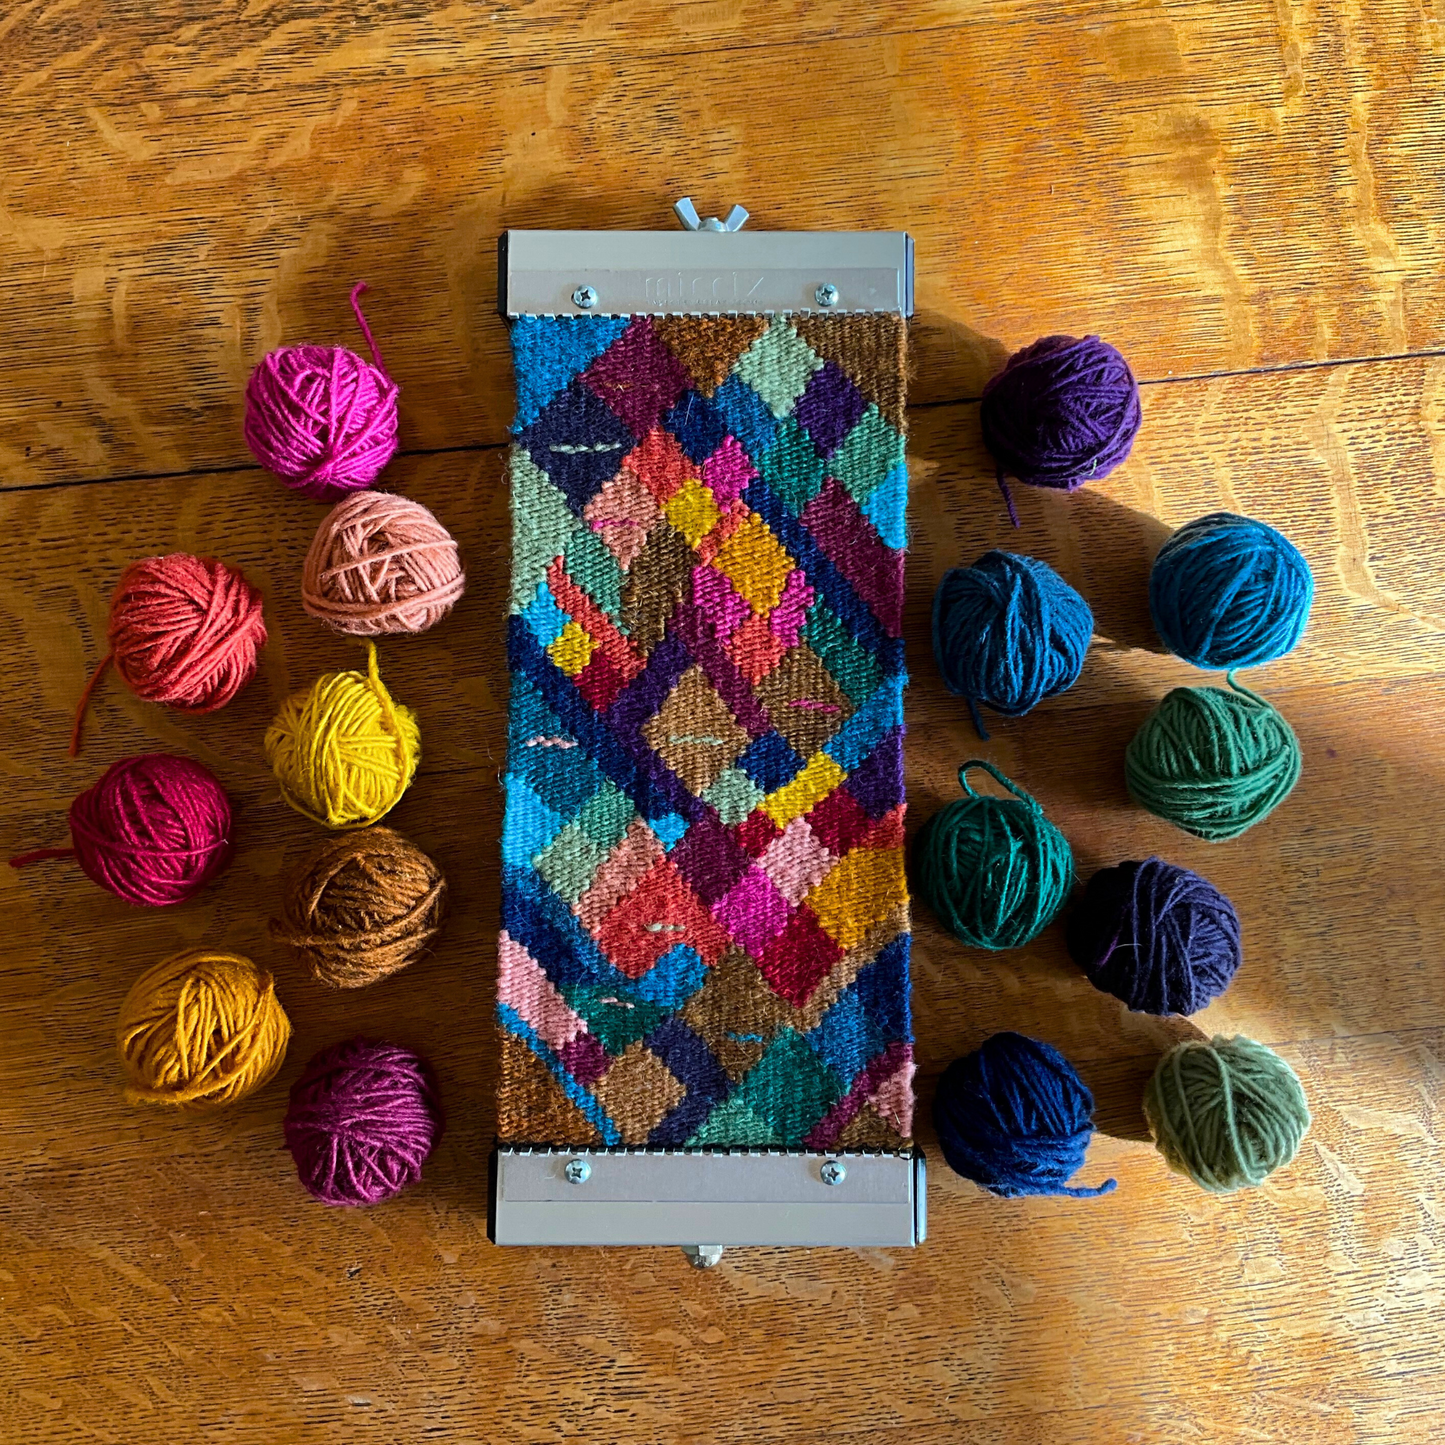 Learn to Weave Tapestry with Rebecca Mezoff: A Loom, a Yarn Kit